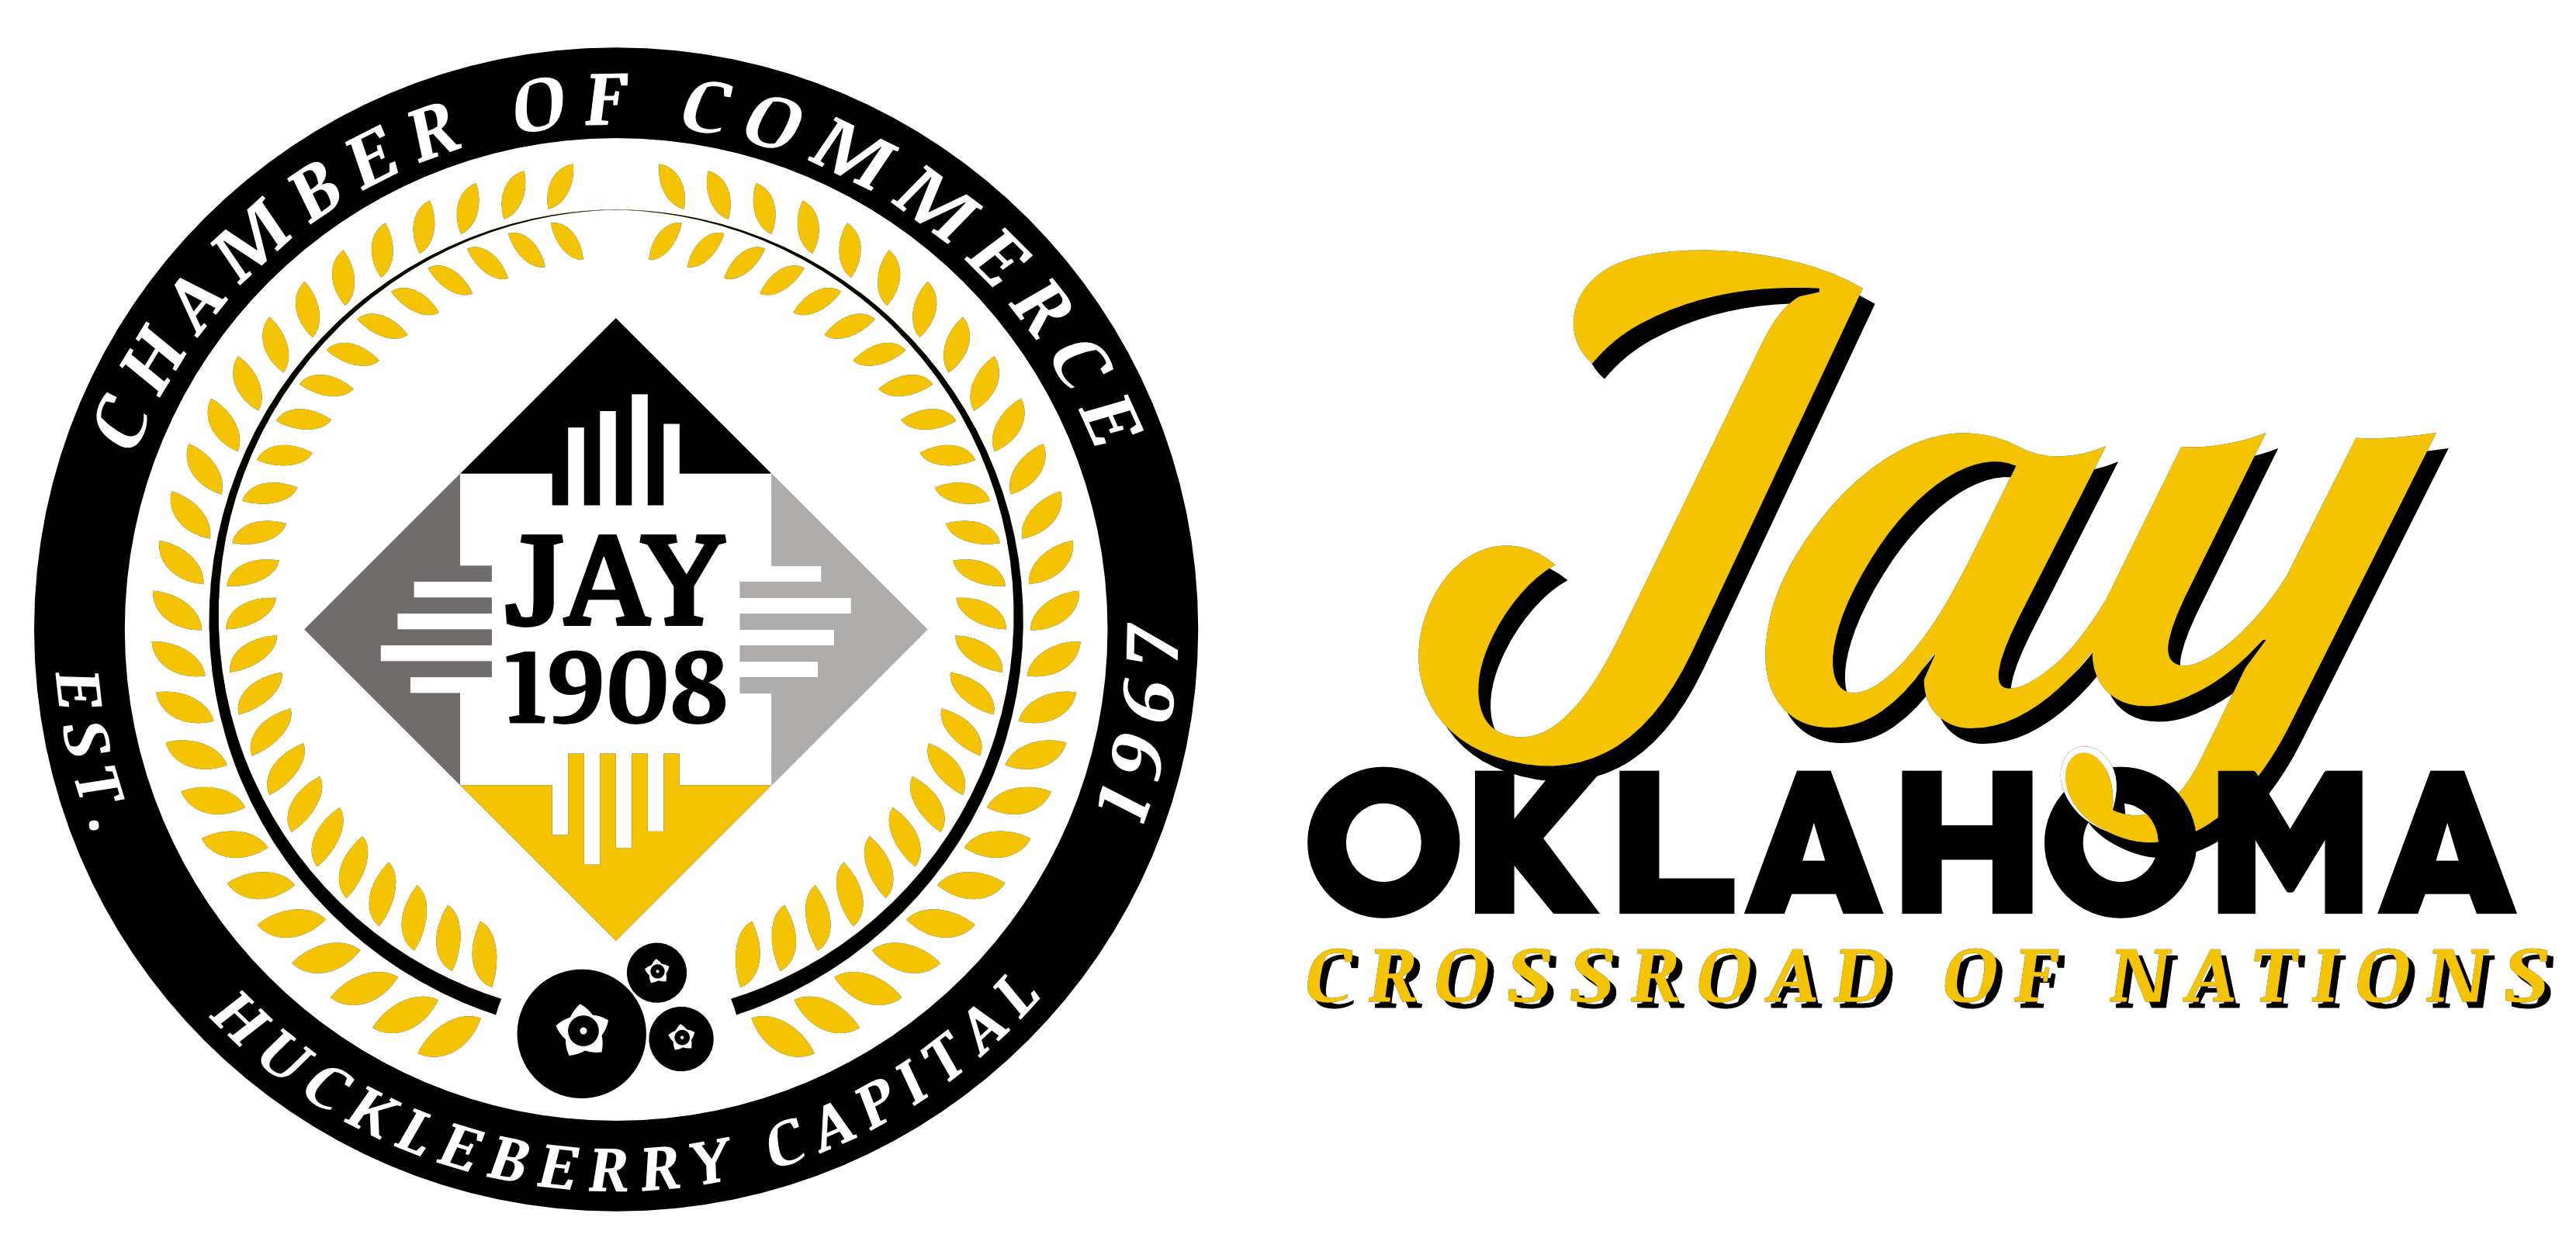 Jay Chamber of Commerce